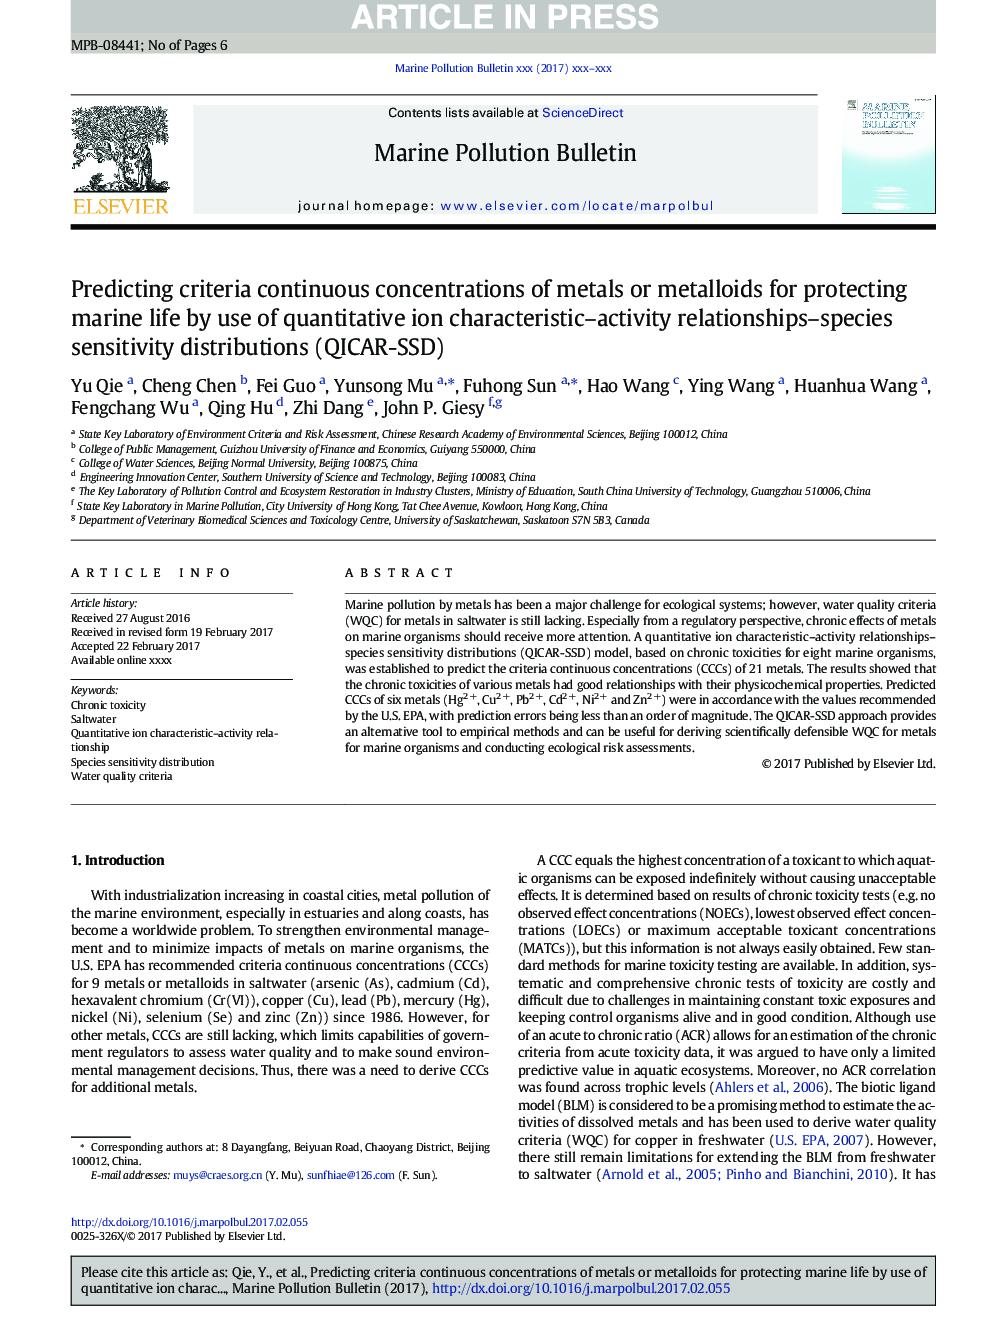 Predicting criteria continuous concentrations of metals or metalloids for protecting marine life by use of quantitative ion characteristic-activity relationships-species sensitivity distributions (QICAR-SSD)